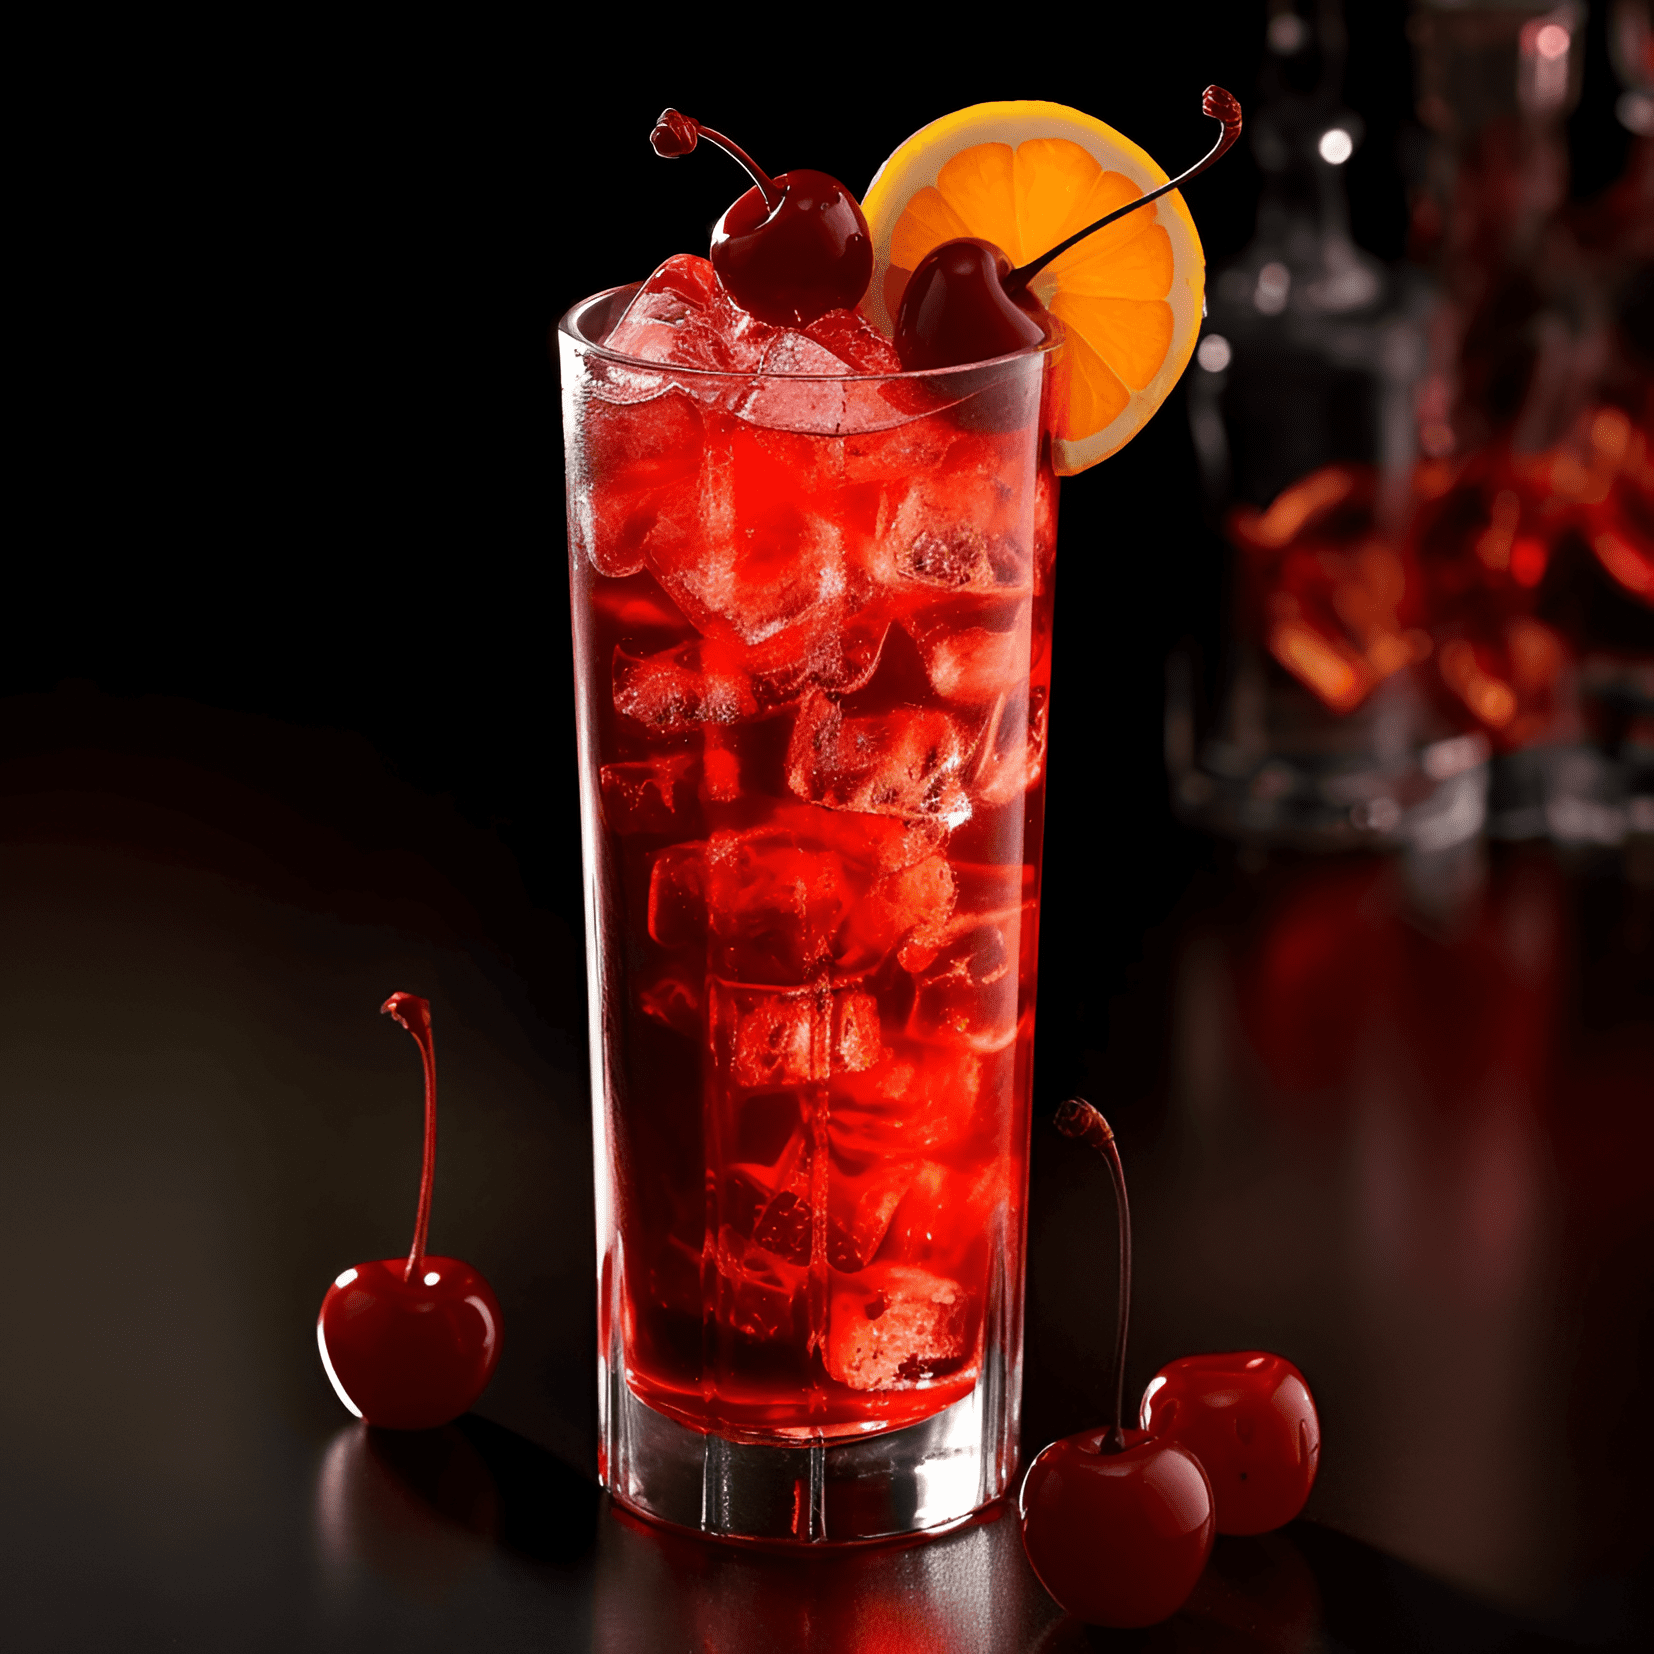 The Red Death cocktail is a fruity and sweet concoction, with a hint of sourness from the lemon juice. It has a smooth and refreshing taste, making it easy to drink and enjoy. The combination of different fruit flavors creates a unique and delicious taste that is both satisfying and invigorating.